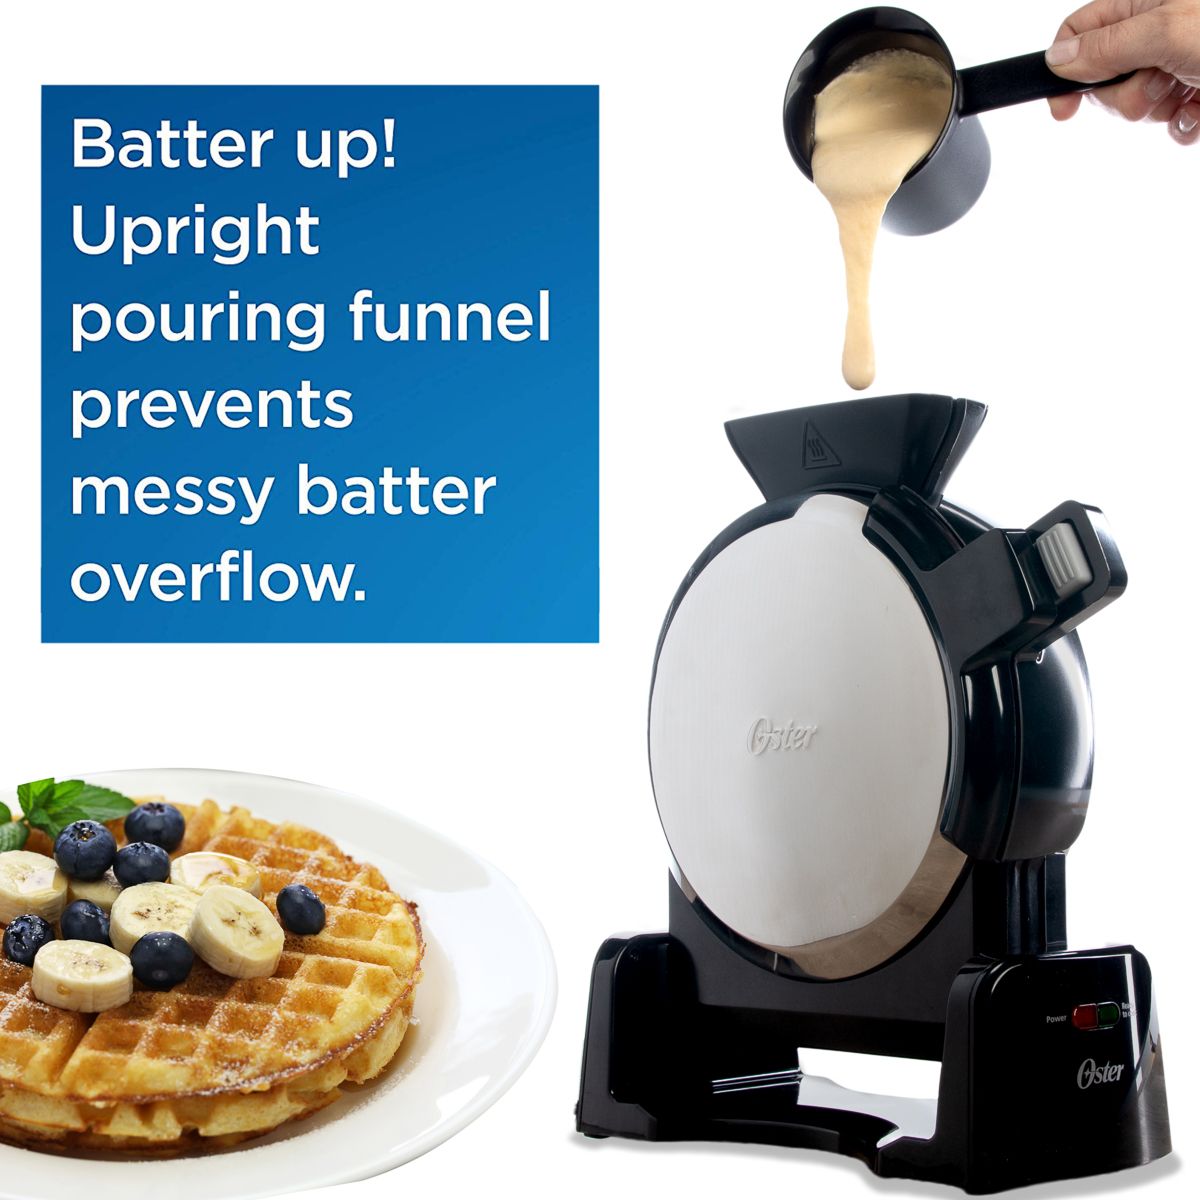 Oster Vertical Waffle Maker w/ Mess-Free Pouring Funnel and Scoop - Scarvesnthangs